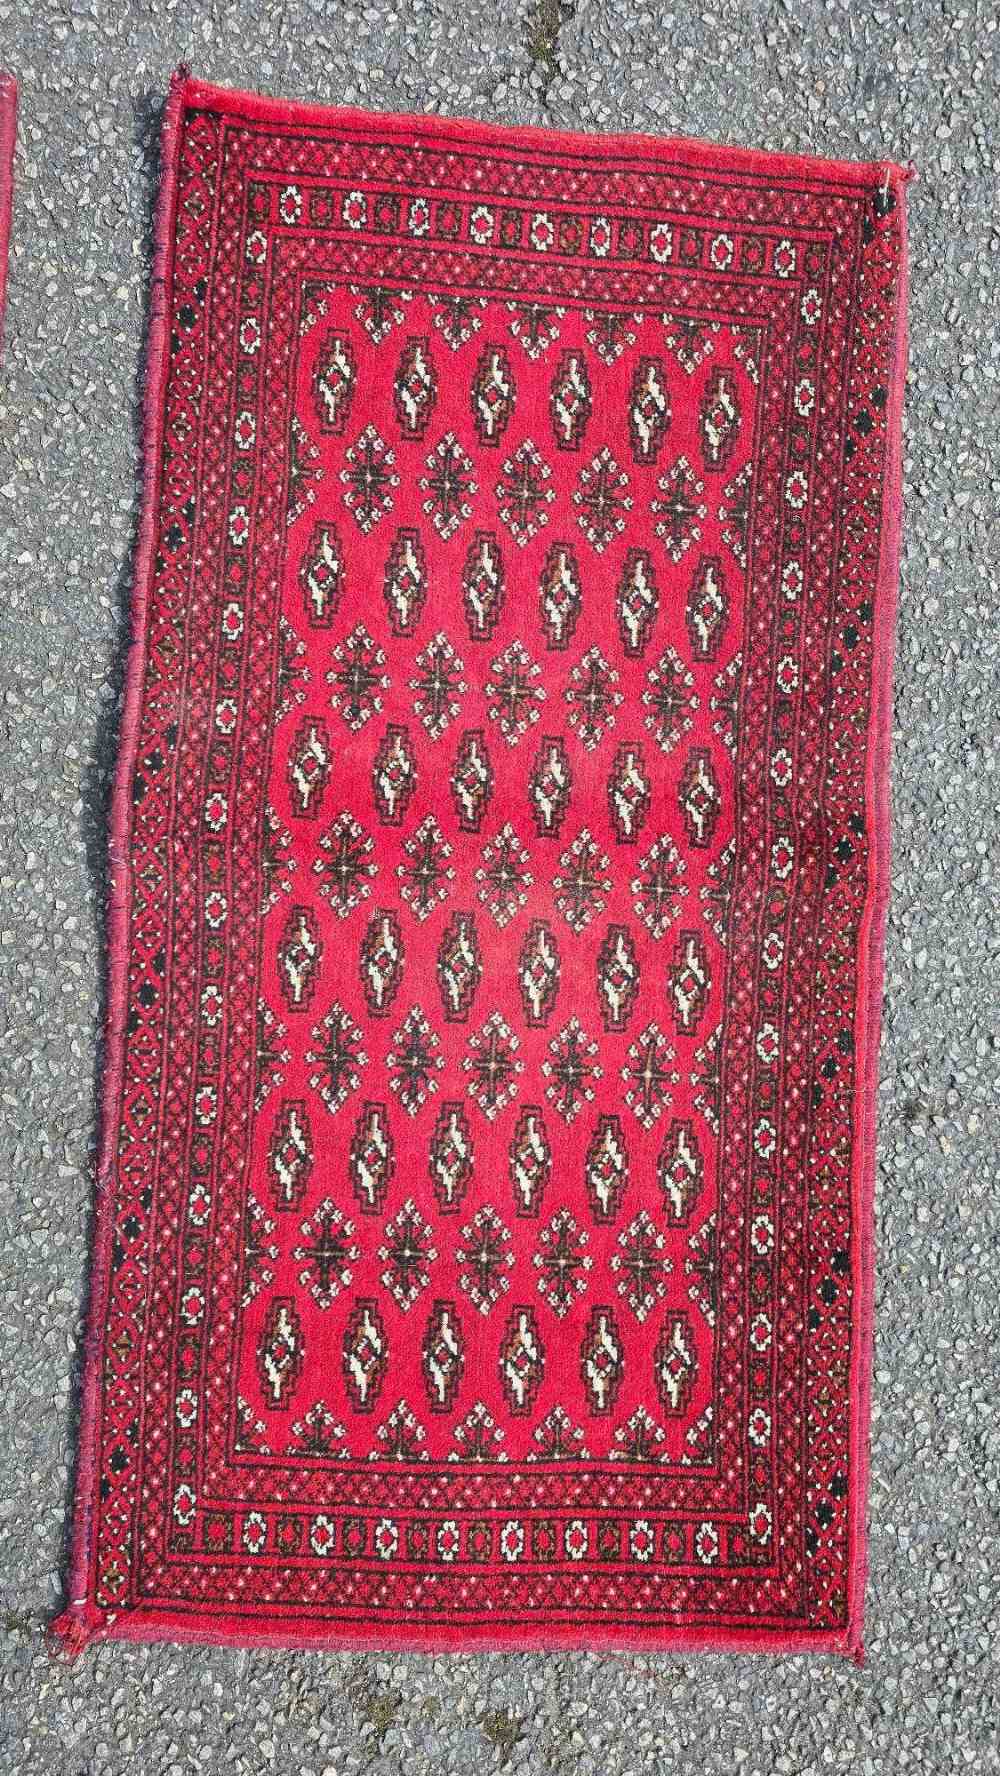 PAIR OF RED RUGS 45" X 22" - Image 2 of 2